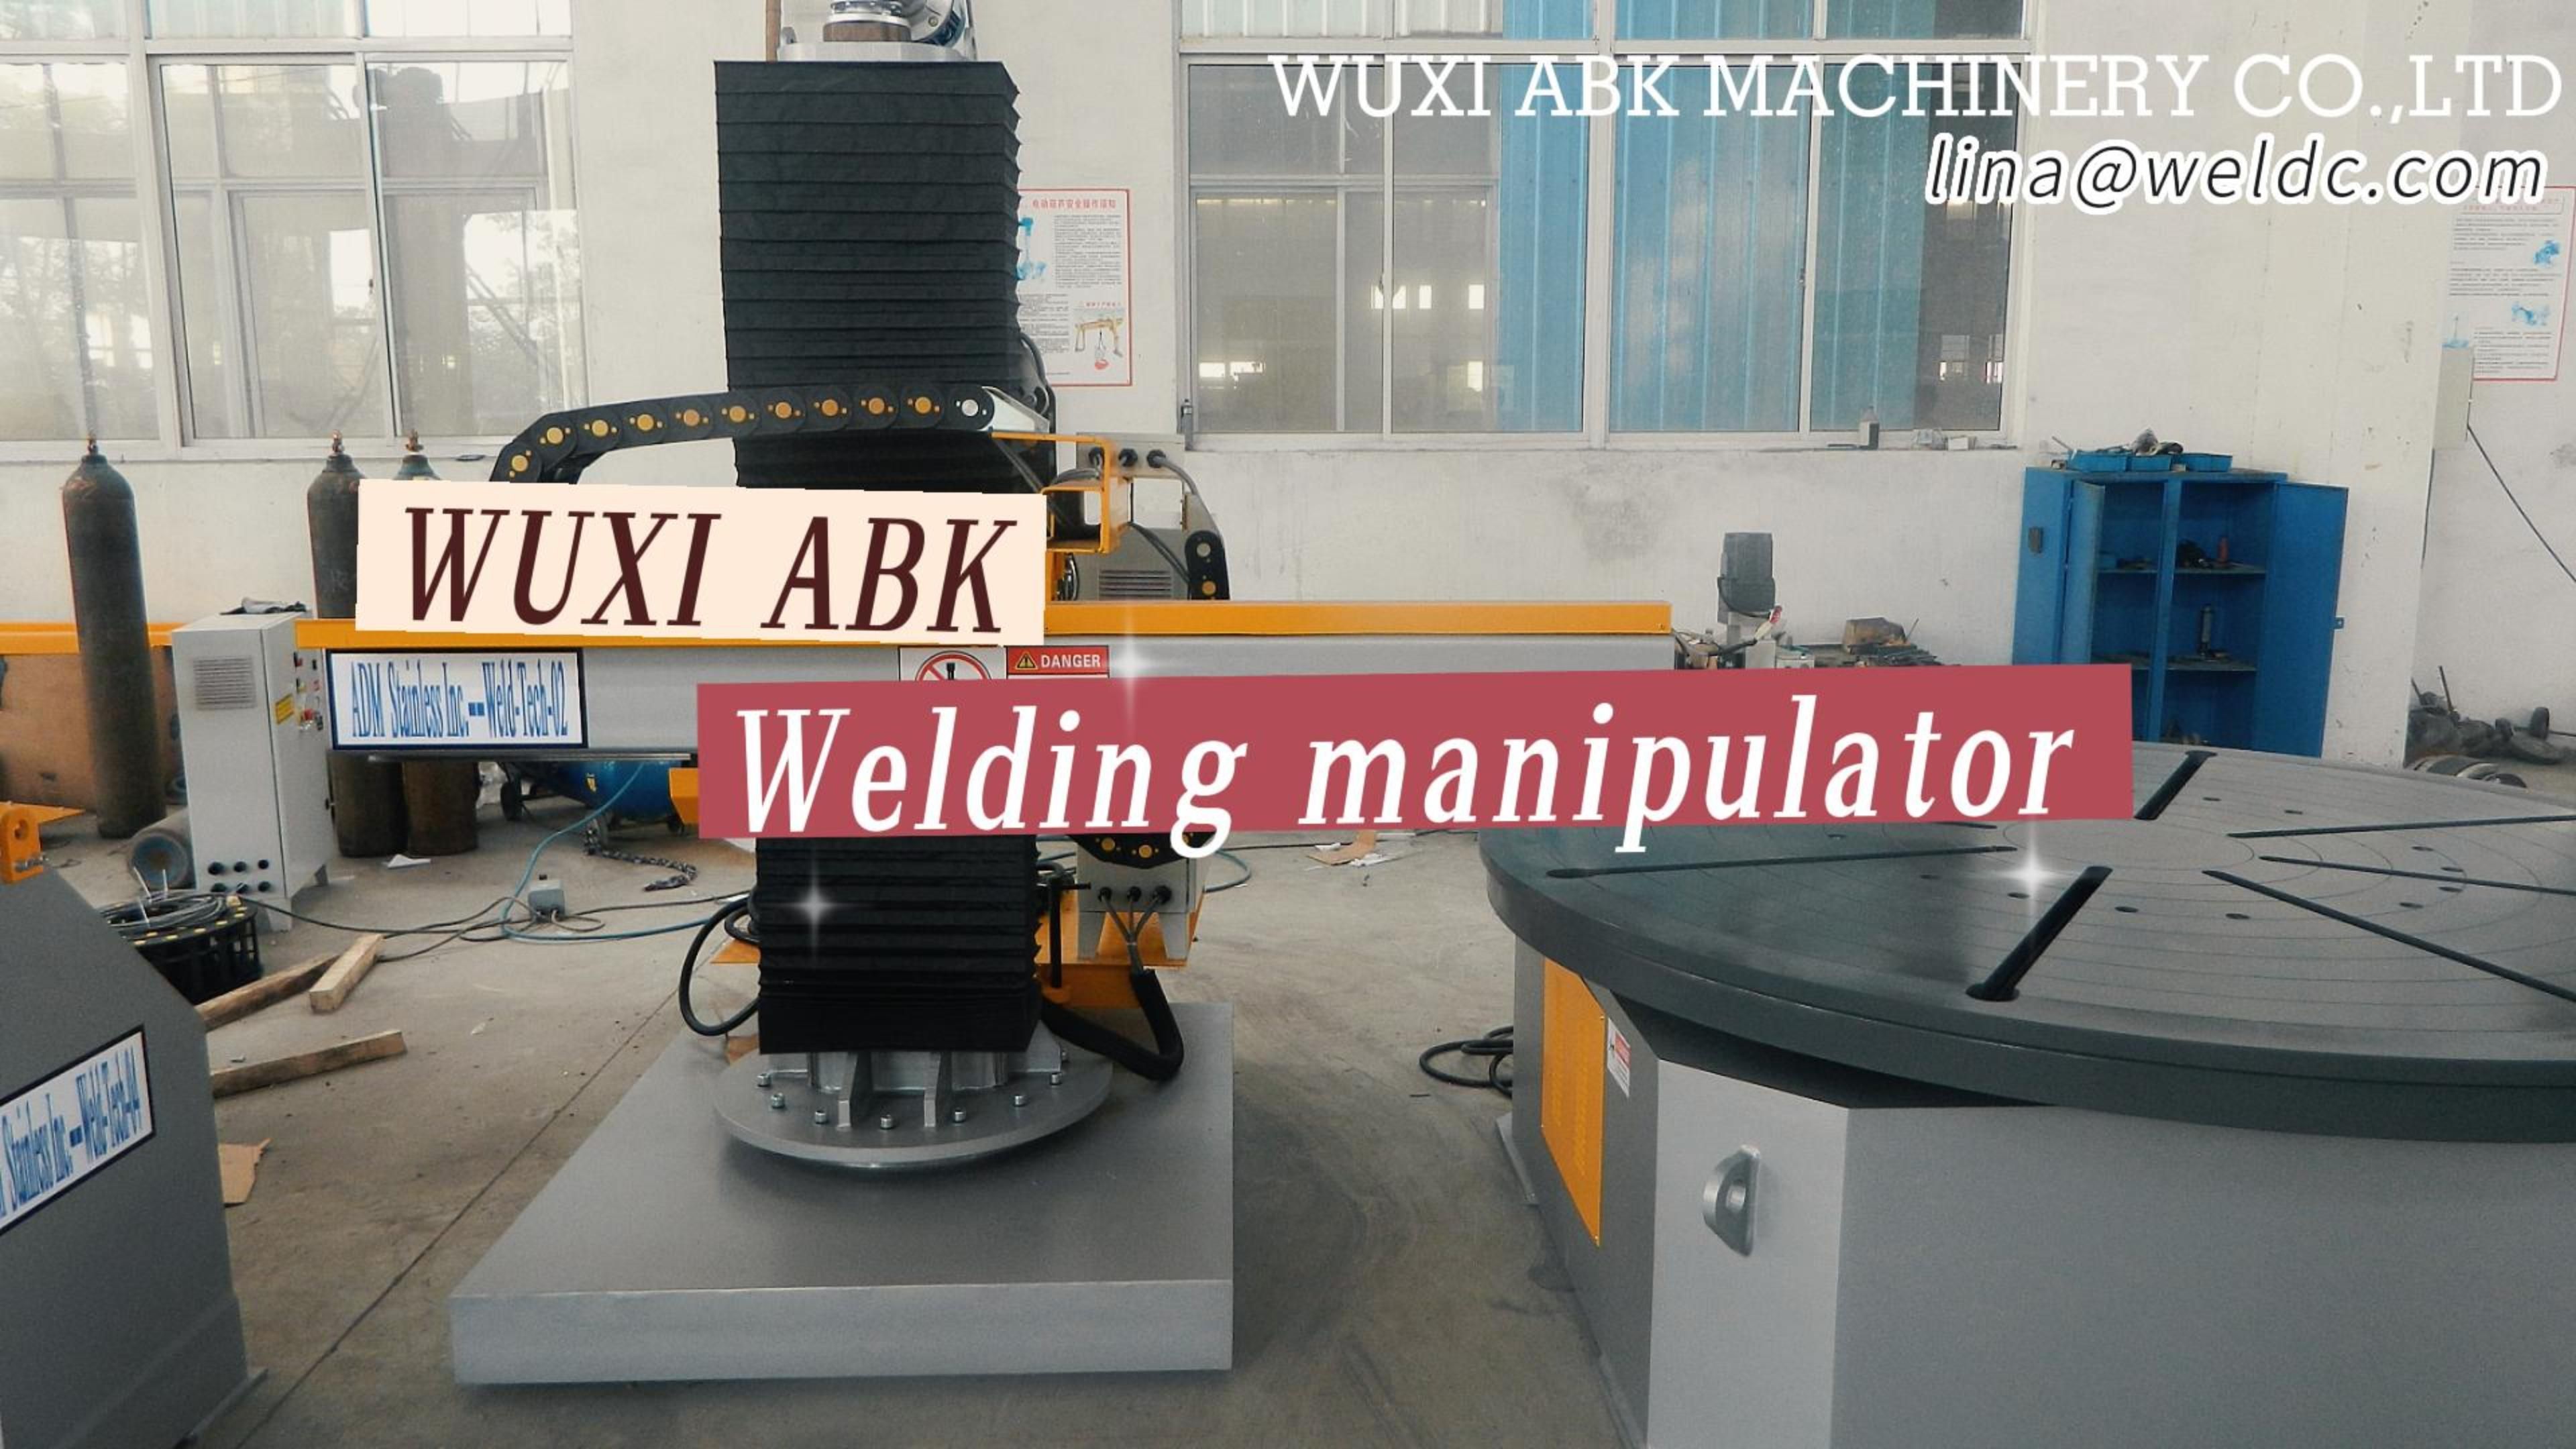 Innovative welding technology, efficient and accurate Welding Manipulator to help enterprises achieve breakthroughs.